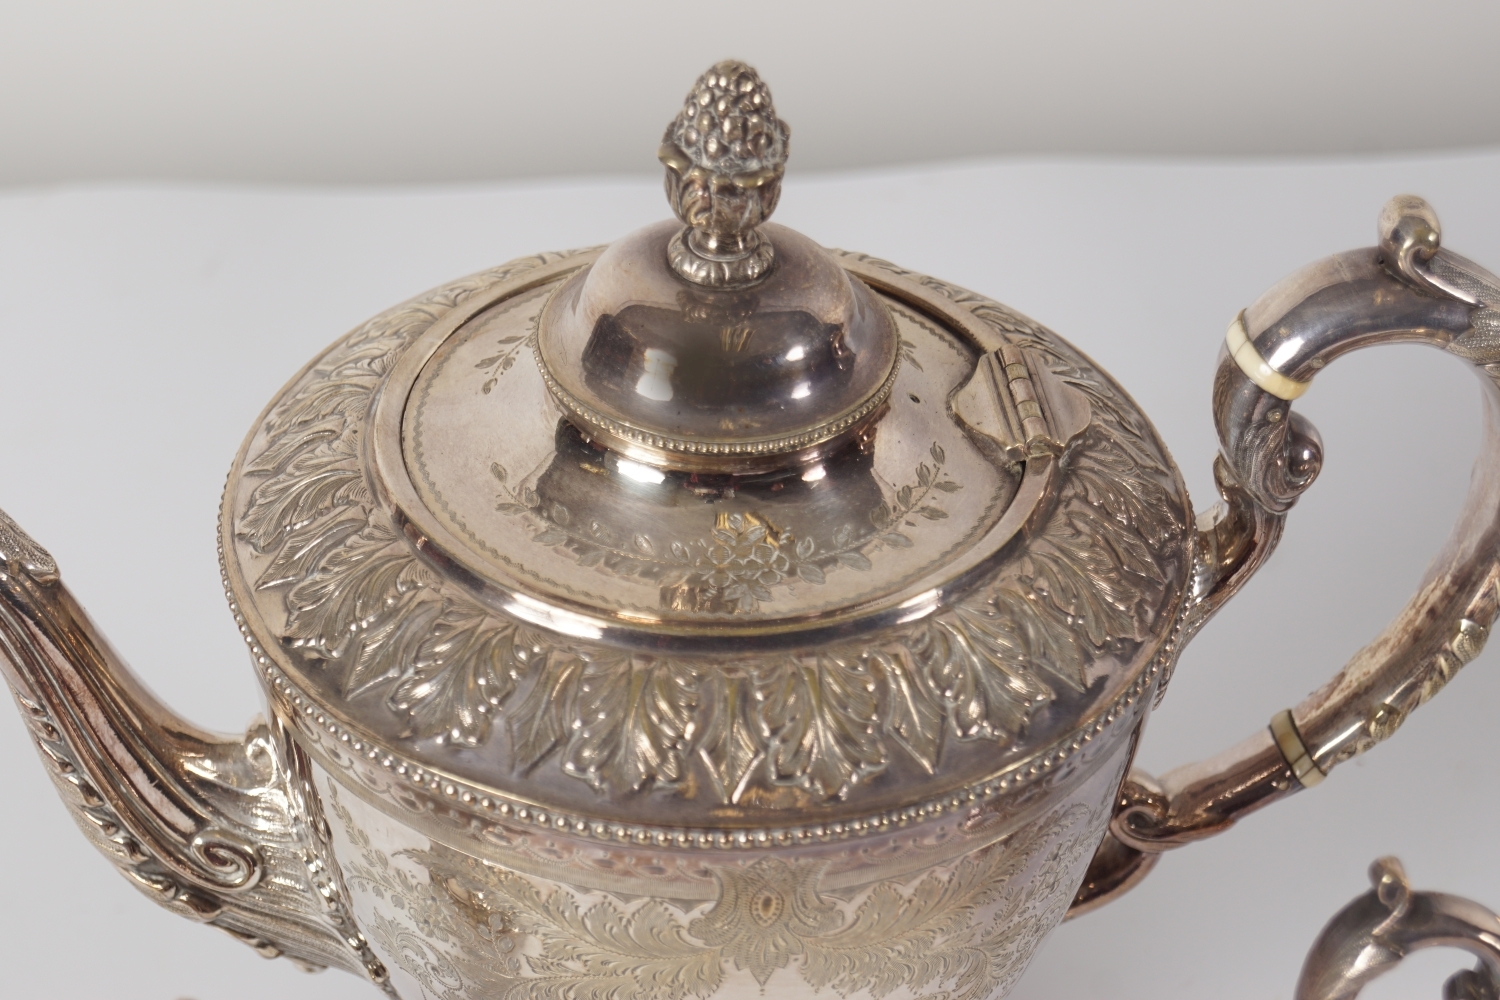 3 PIECE SHEFFIELD SILVER PLATED TEA SERVICE - Image 3 of 4